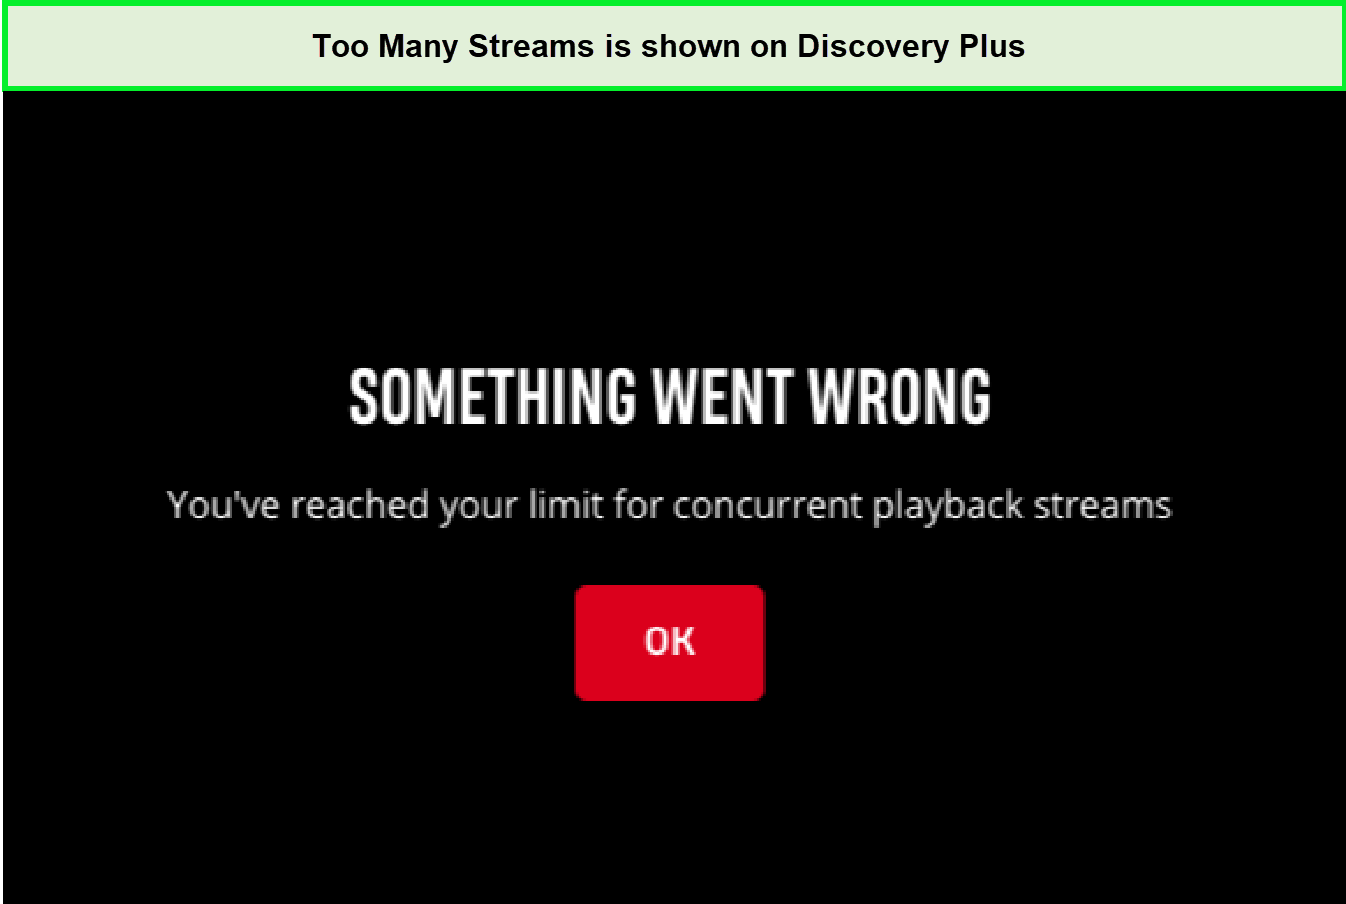 discovery-plus-too-many-streams-error-in-Spain